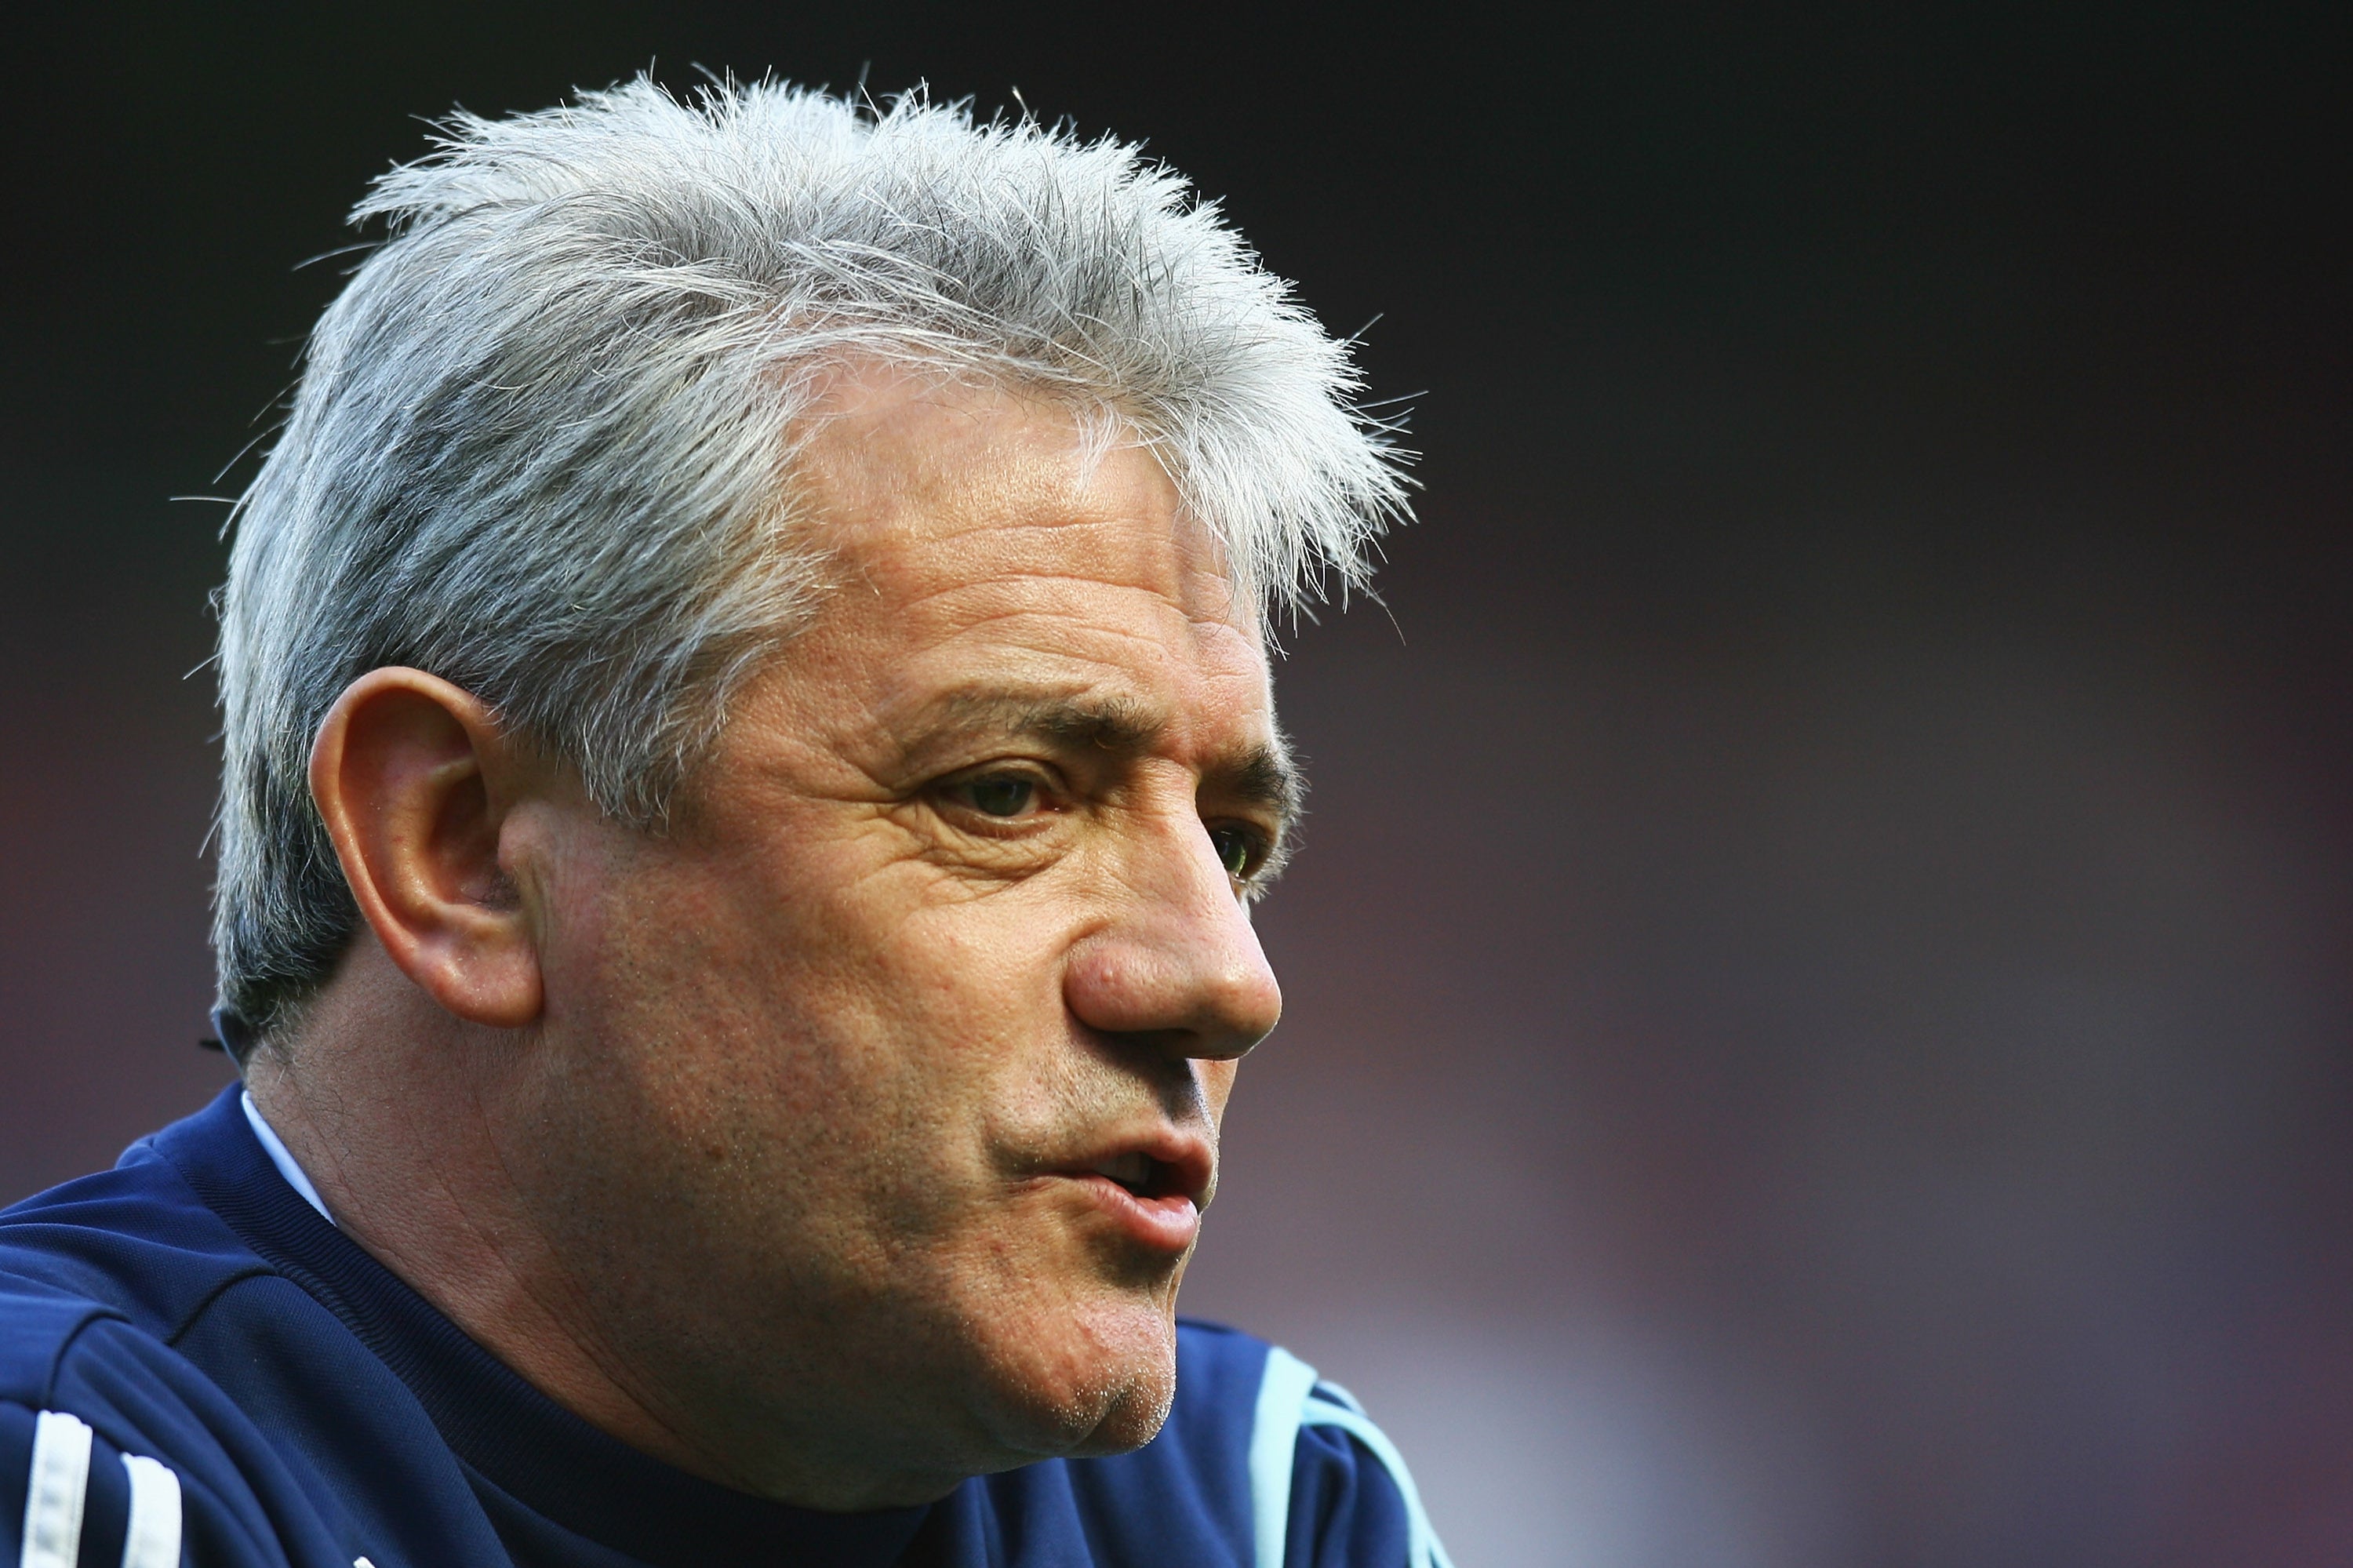 Former England manager Kevin Keegan told an audience of fans he does not like listening to ‘lady footballers’ talk about the England men’s team